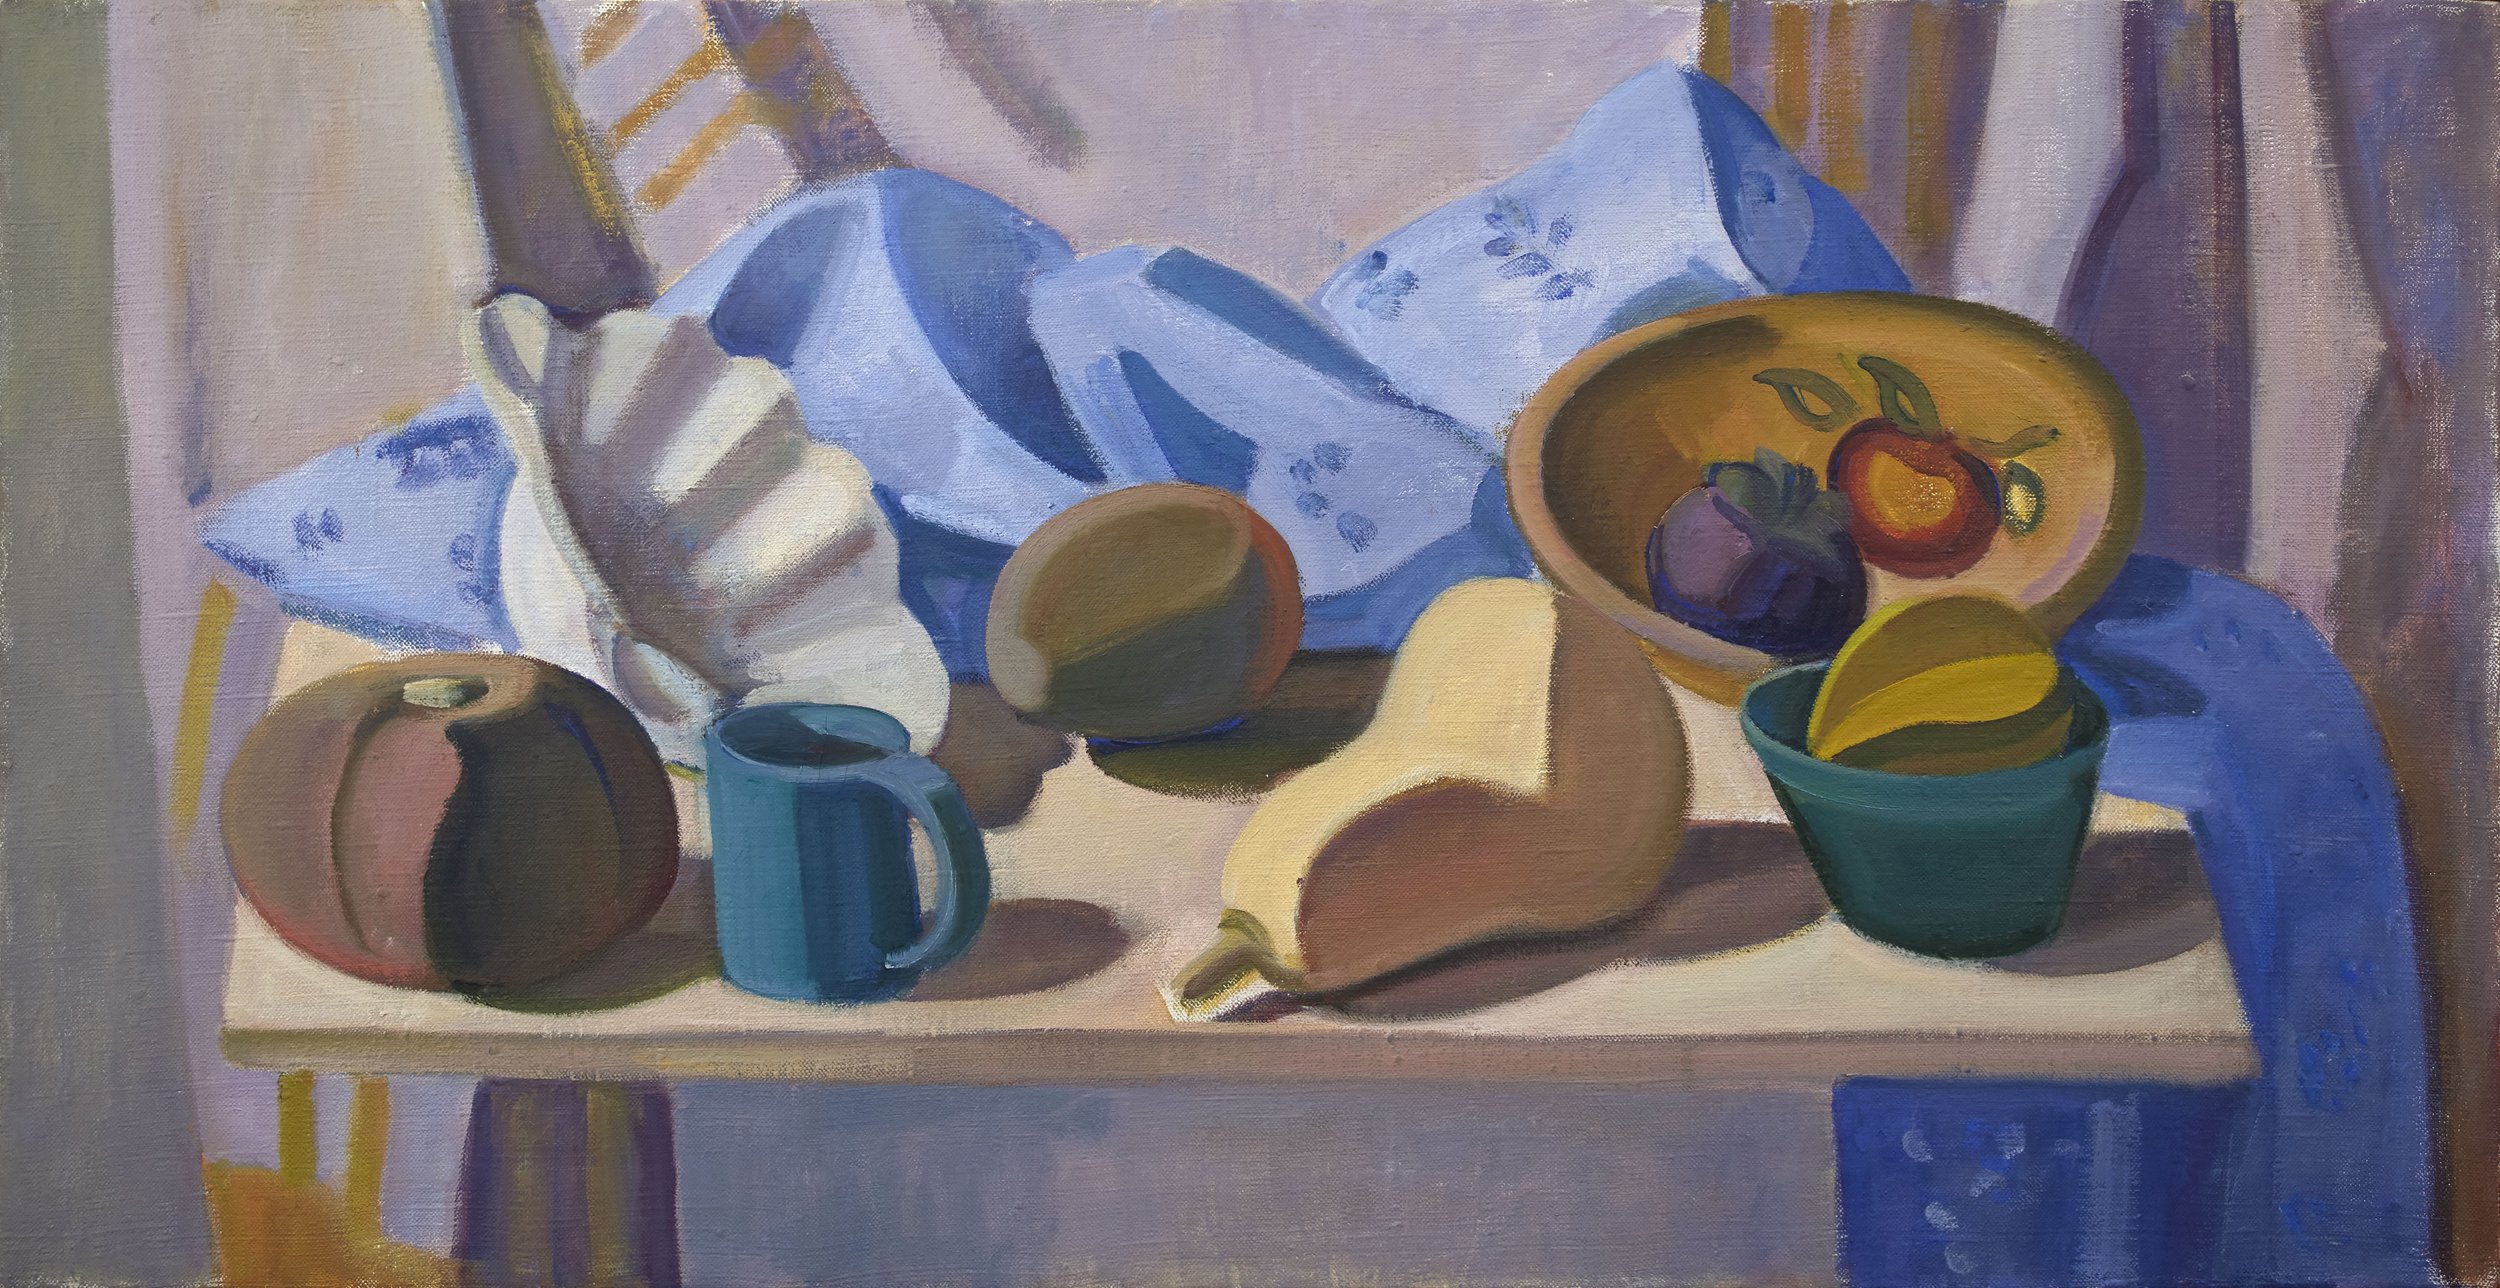   Butternut and Winter Squash, Blue Cloth , c. 2000, oil/canvas, 17 x 33 in. (Private collection) 